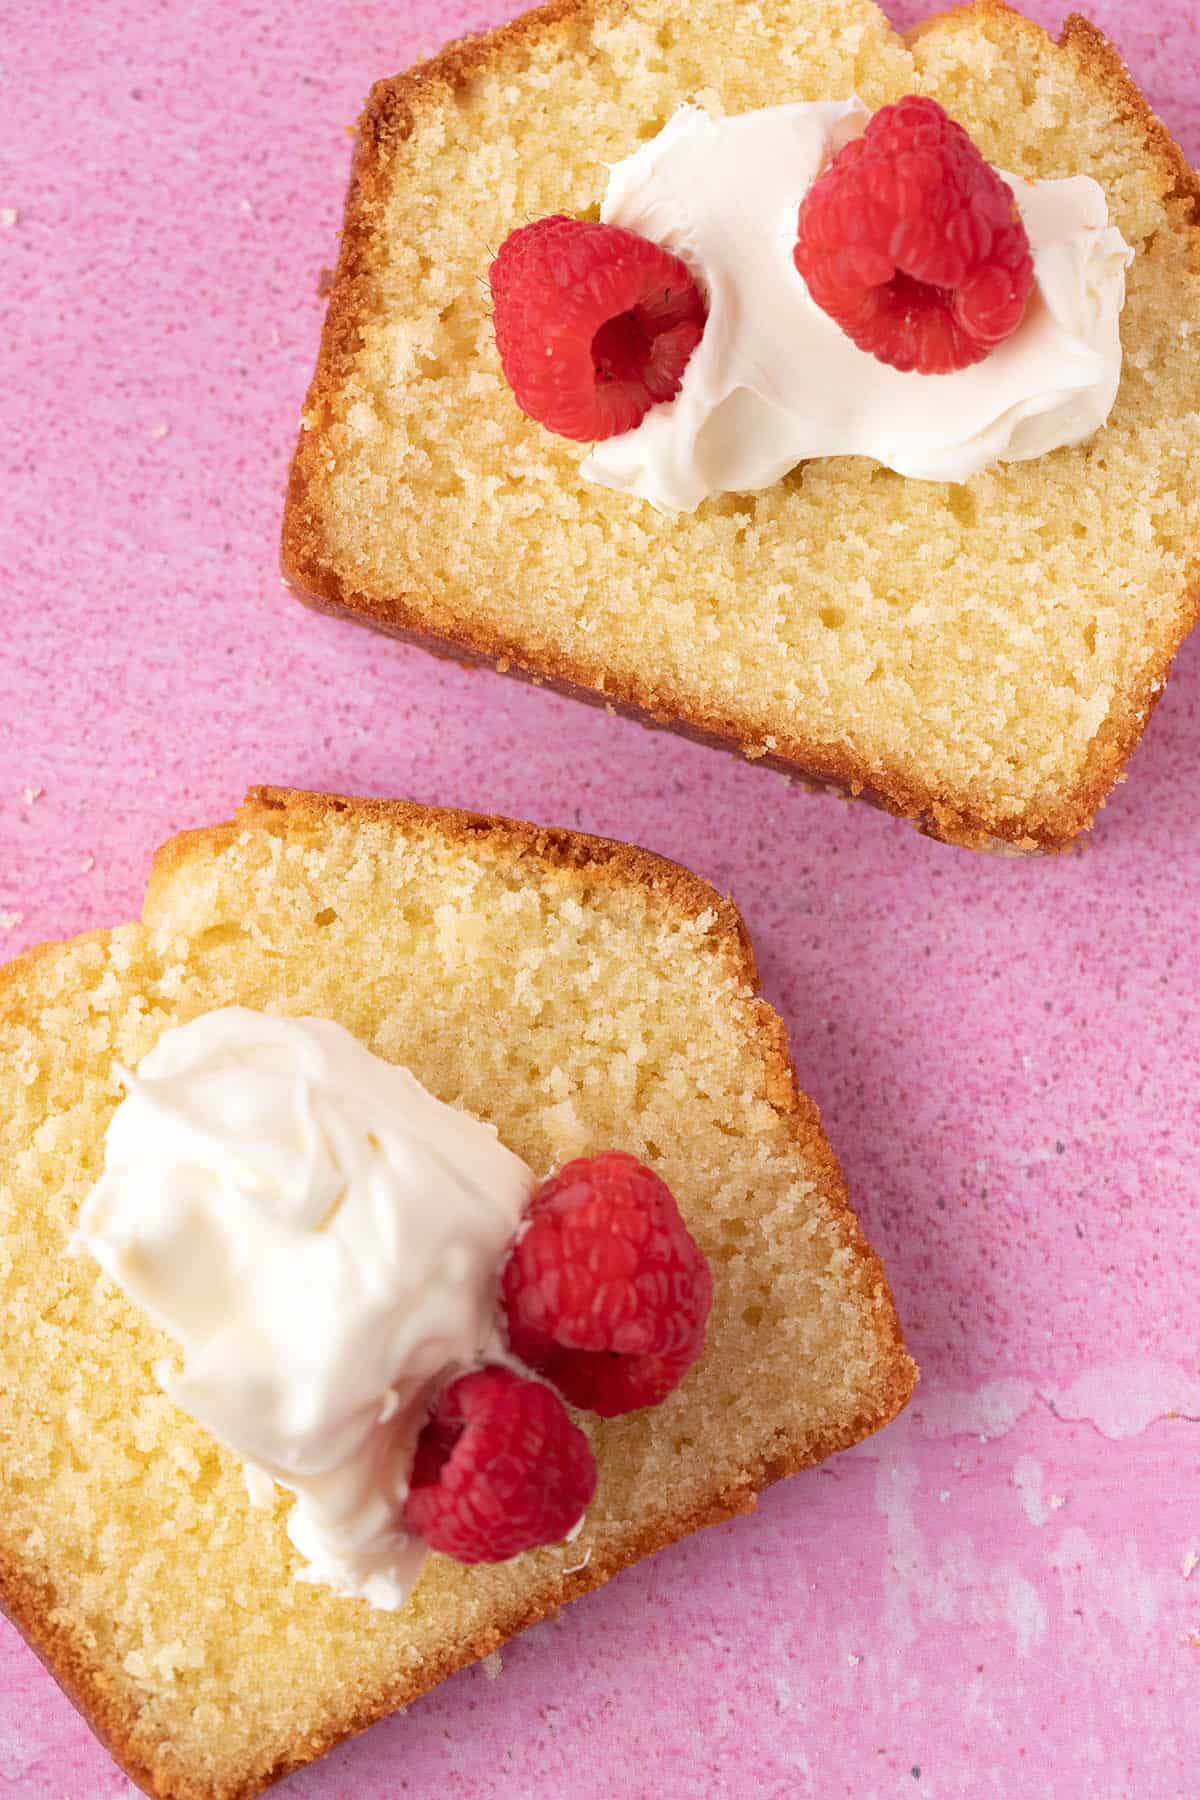 Top view of a slices of Pound Cake topped with cream and berries